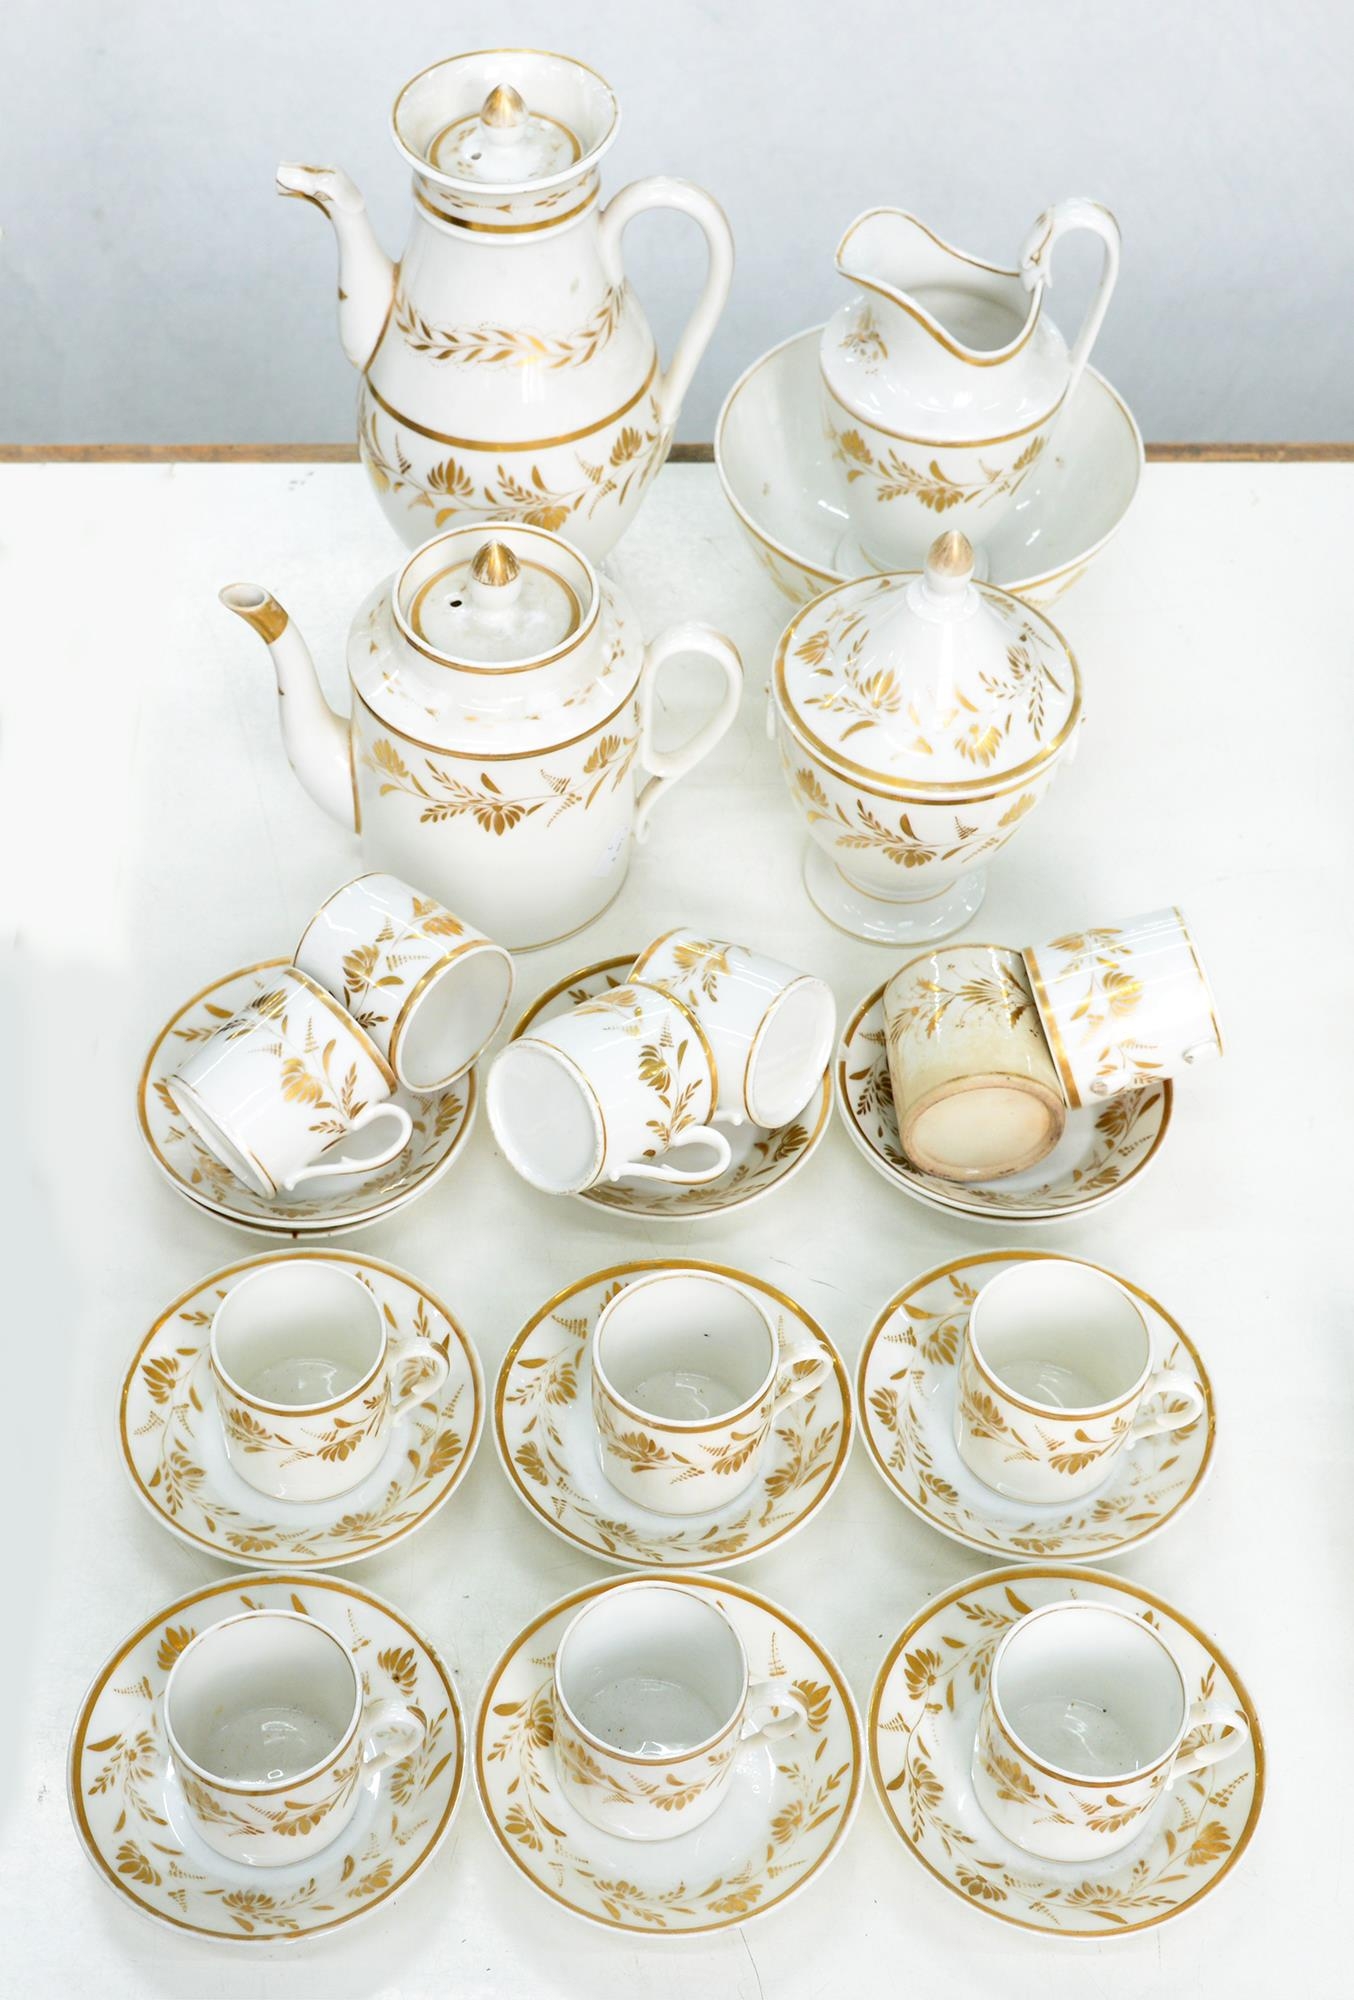 A Continental white and gilt hard-paste porcelain coffee service, possibly Paris, c1810, coffee